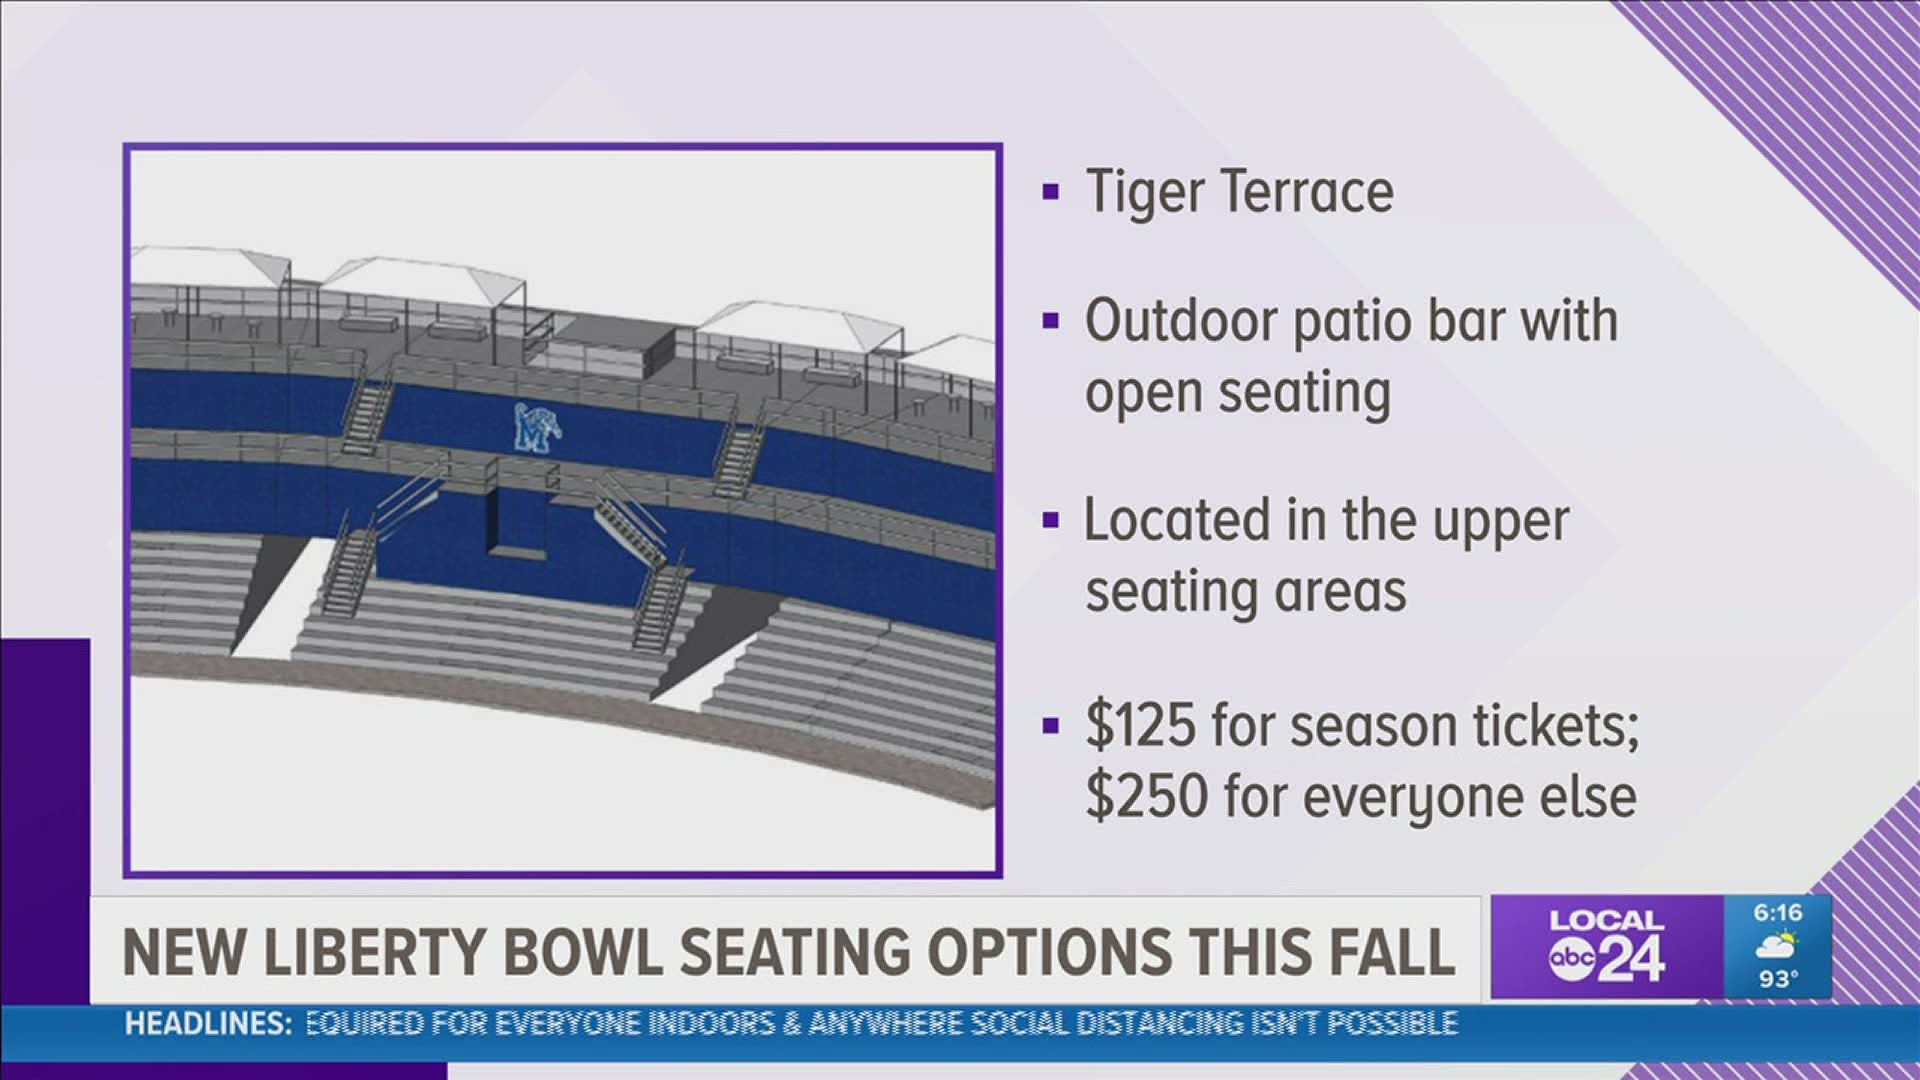 The all-inclusive Outdoor Club features some of the best views of the game, and the Tiger Terrace is designed as an outdoor patio bar with open seating.